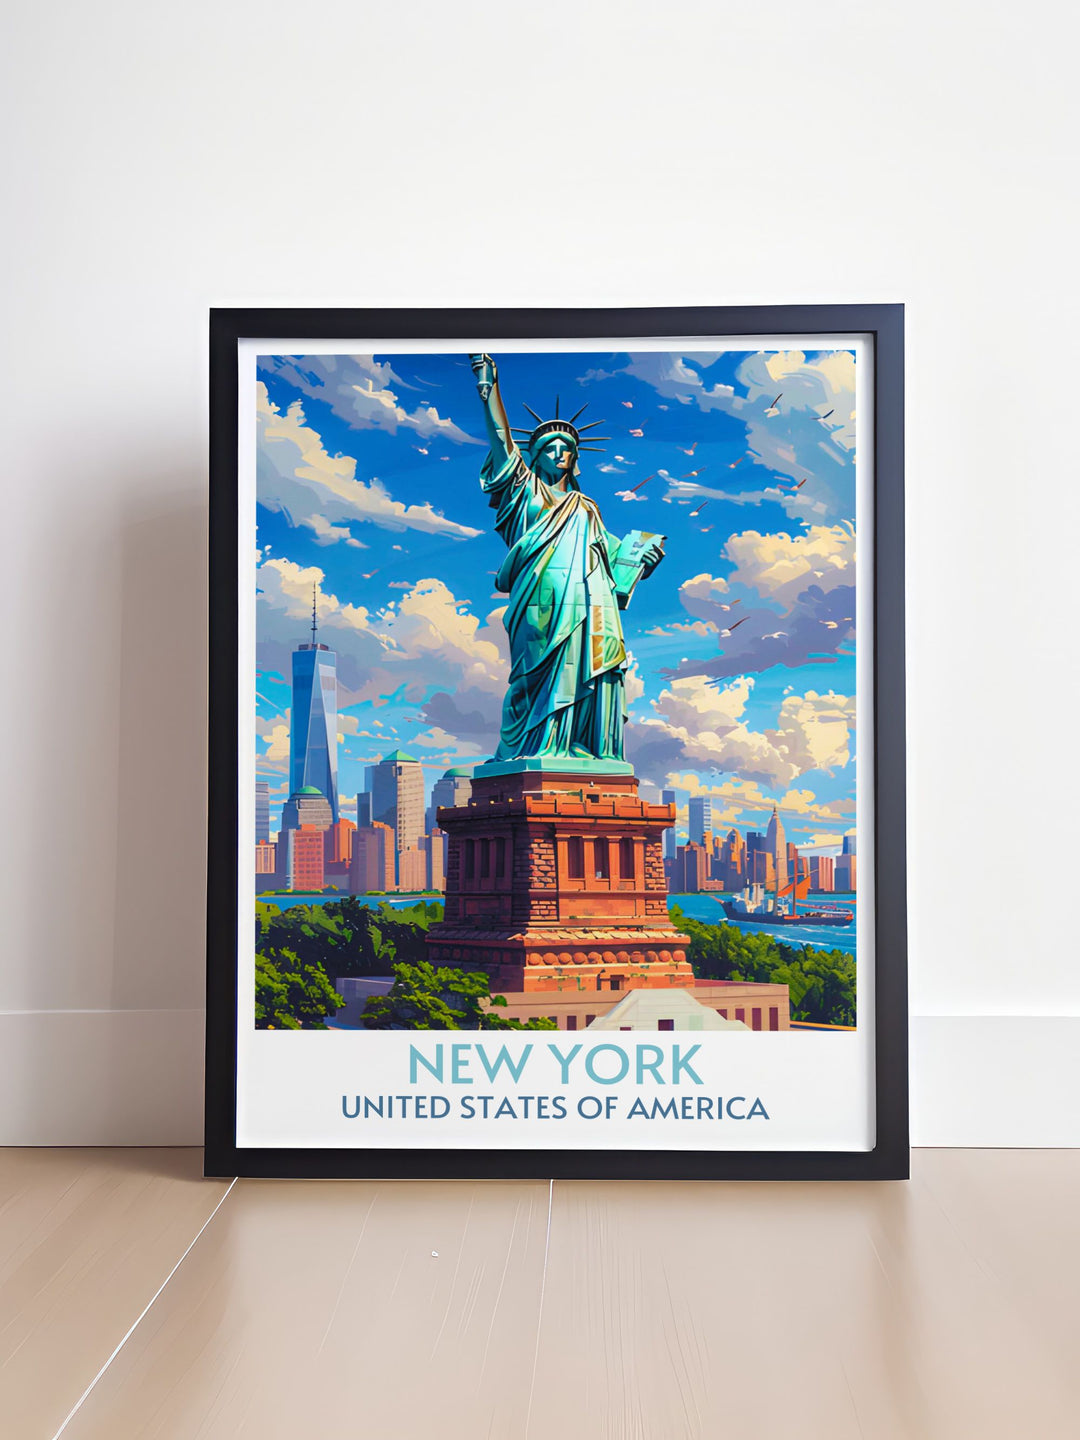 Customizable framed art of the Statue of Liberty, perfect for personalizing home decor.